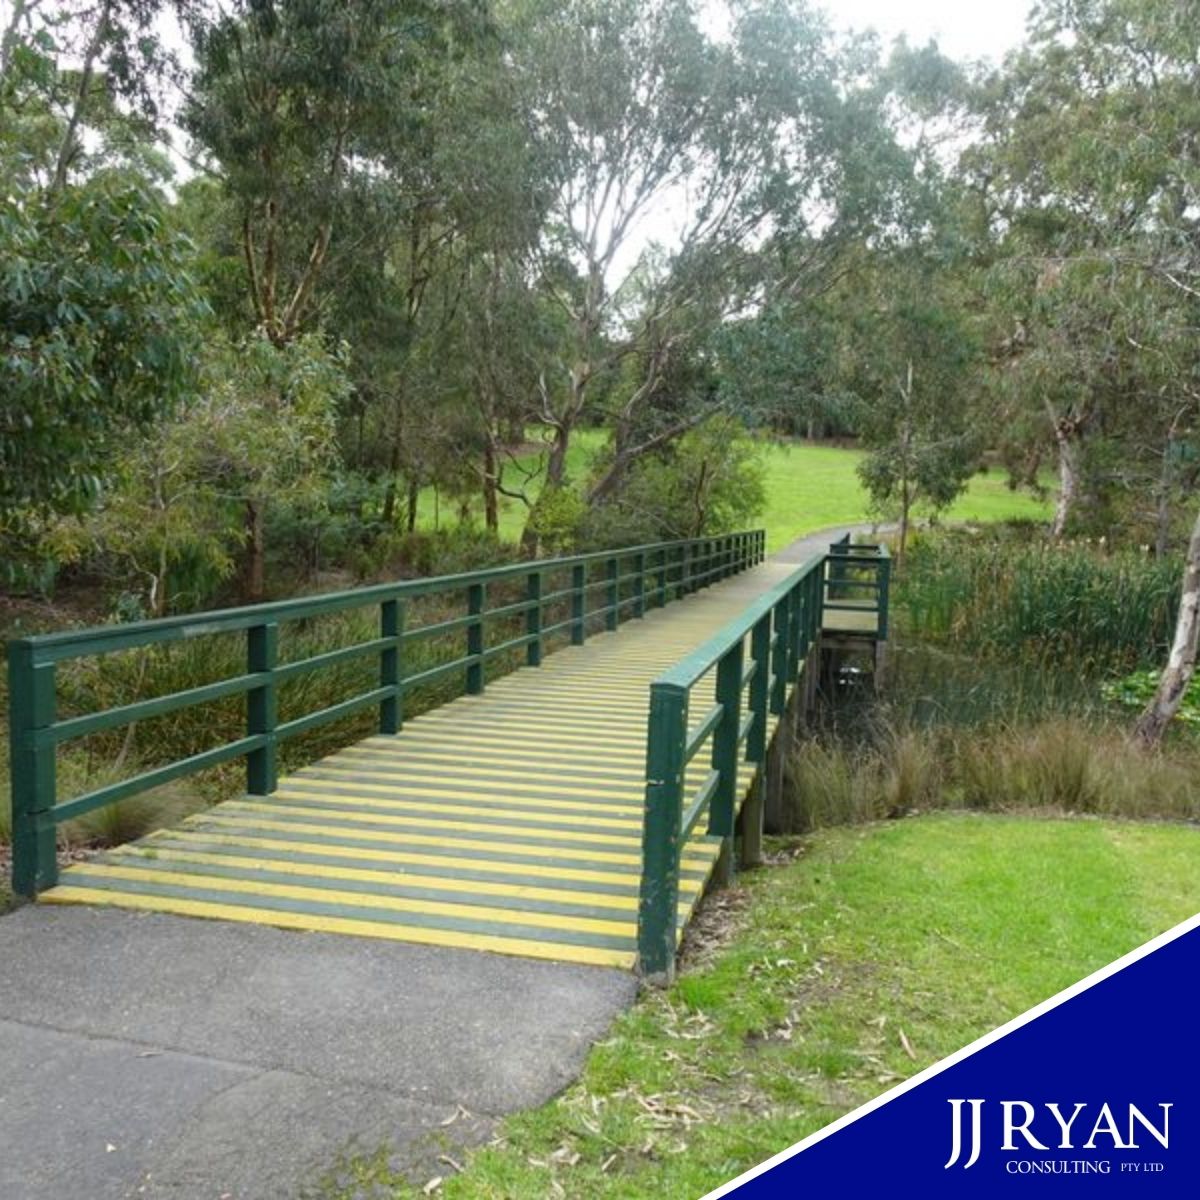 Banyule City Council engaged JJR to conduct condition assessments for bridges and culverts assets within the City of Banyule Local Government Area (LGA) as part of the development of a long term works program.

jjryan.com.au

#Bridges #BuildingTheFutureTogether #JJR